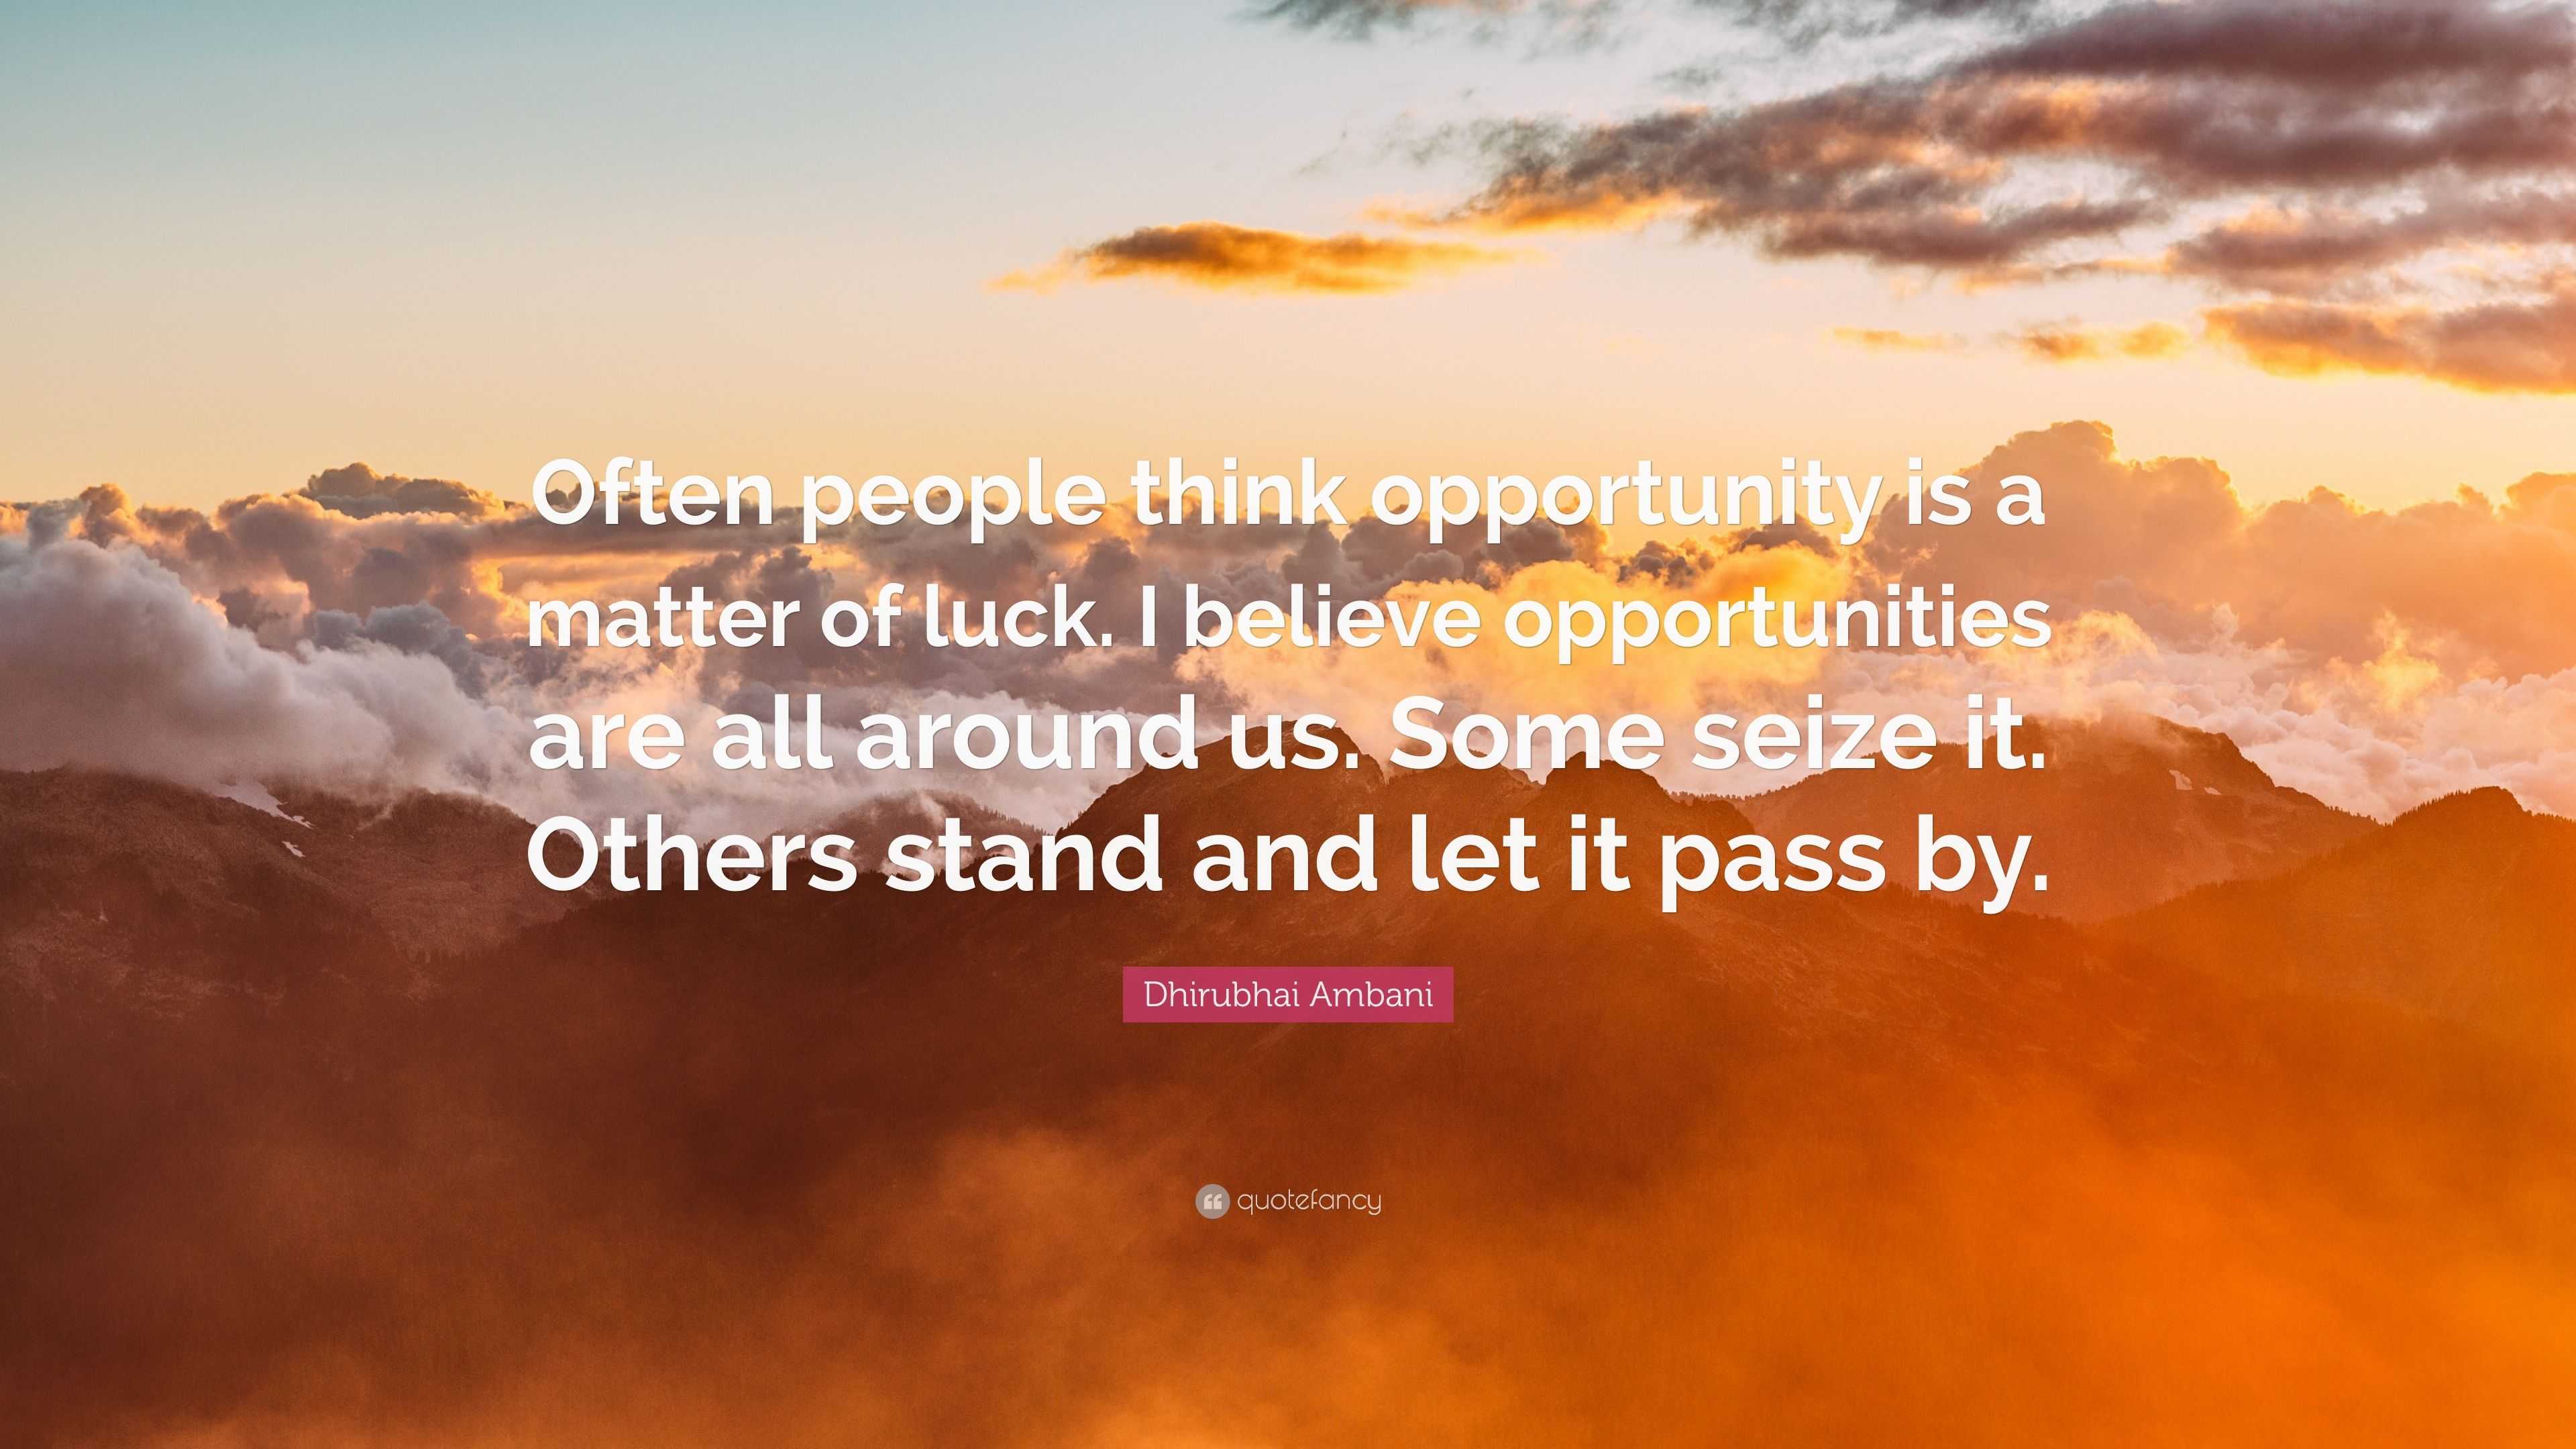 Dhirubhai Ambani Quote: “Often people think opportunity is a matter of ...